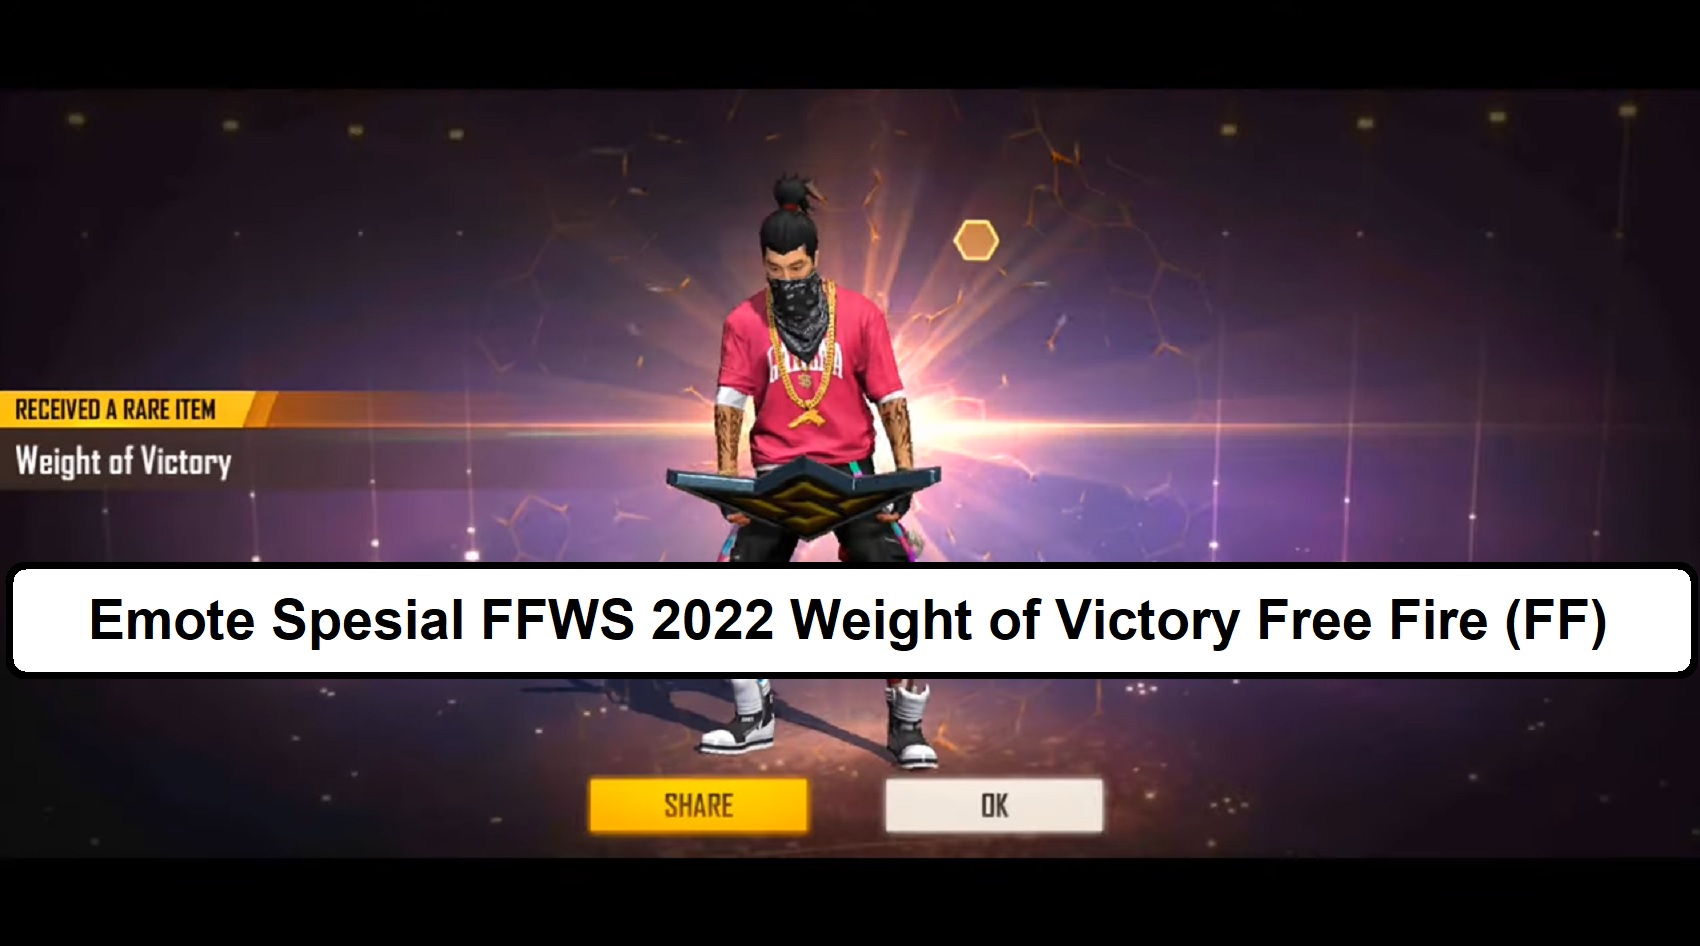 Emote Spesial FFWS 2022 Weight of Victory Free Fire (FF)